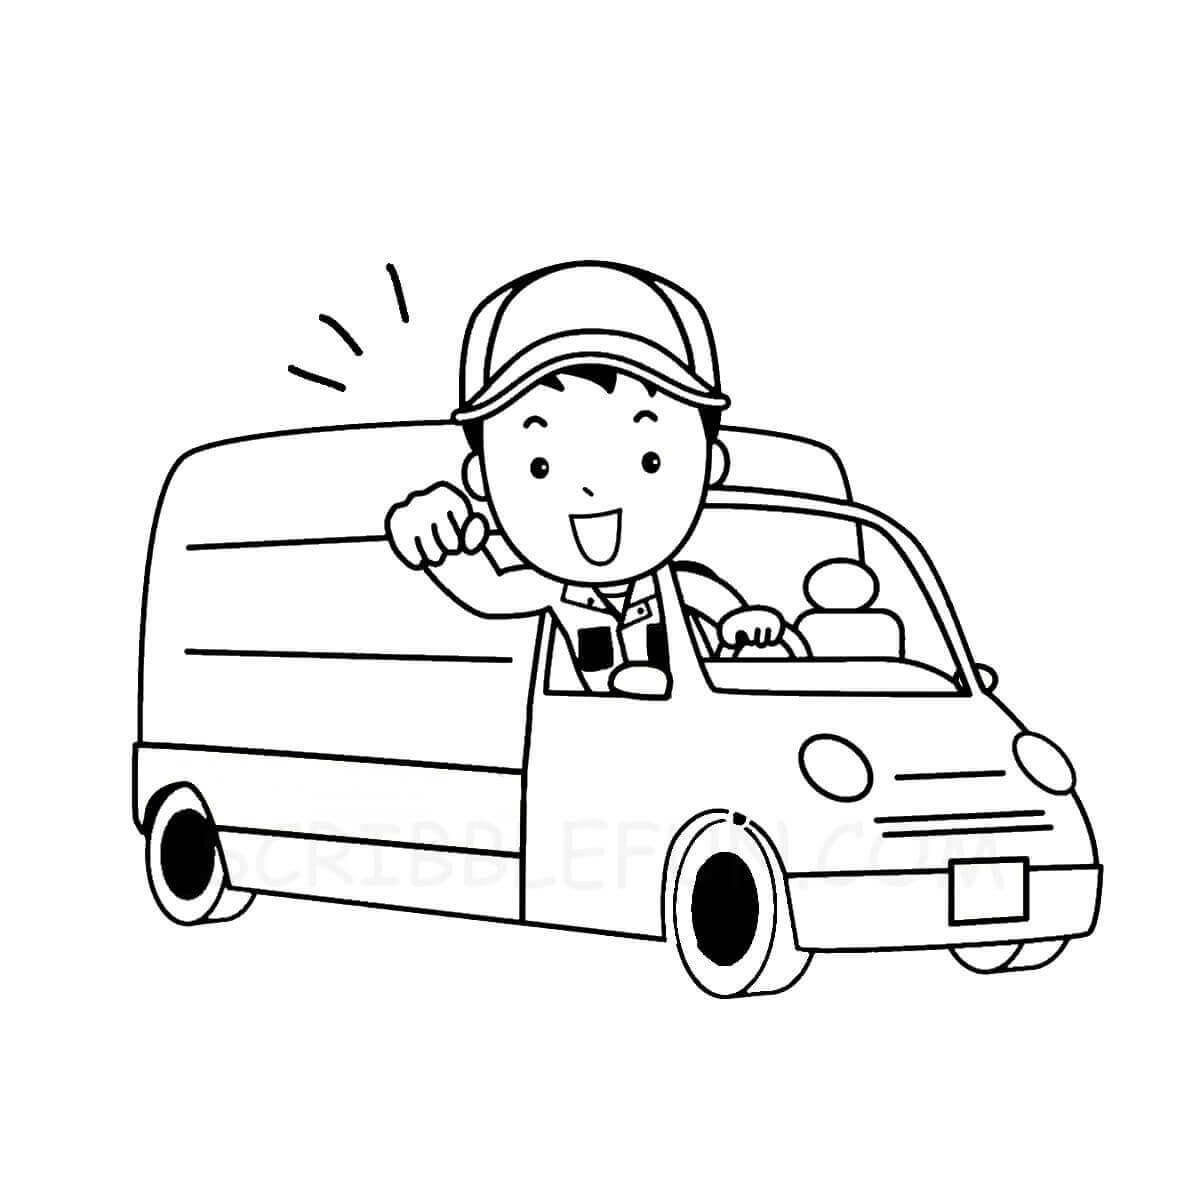 Mail man coloring page